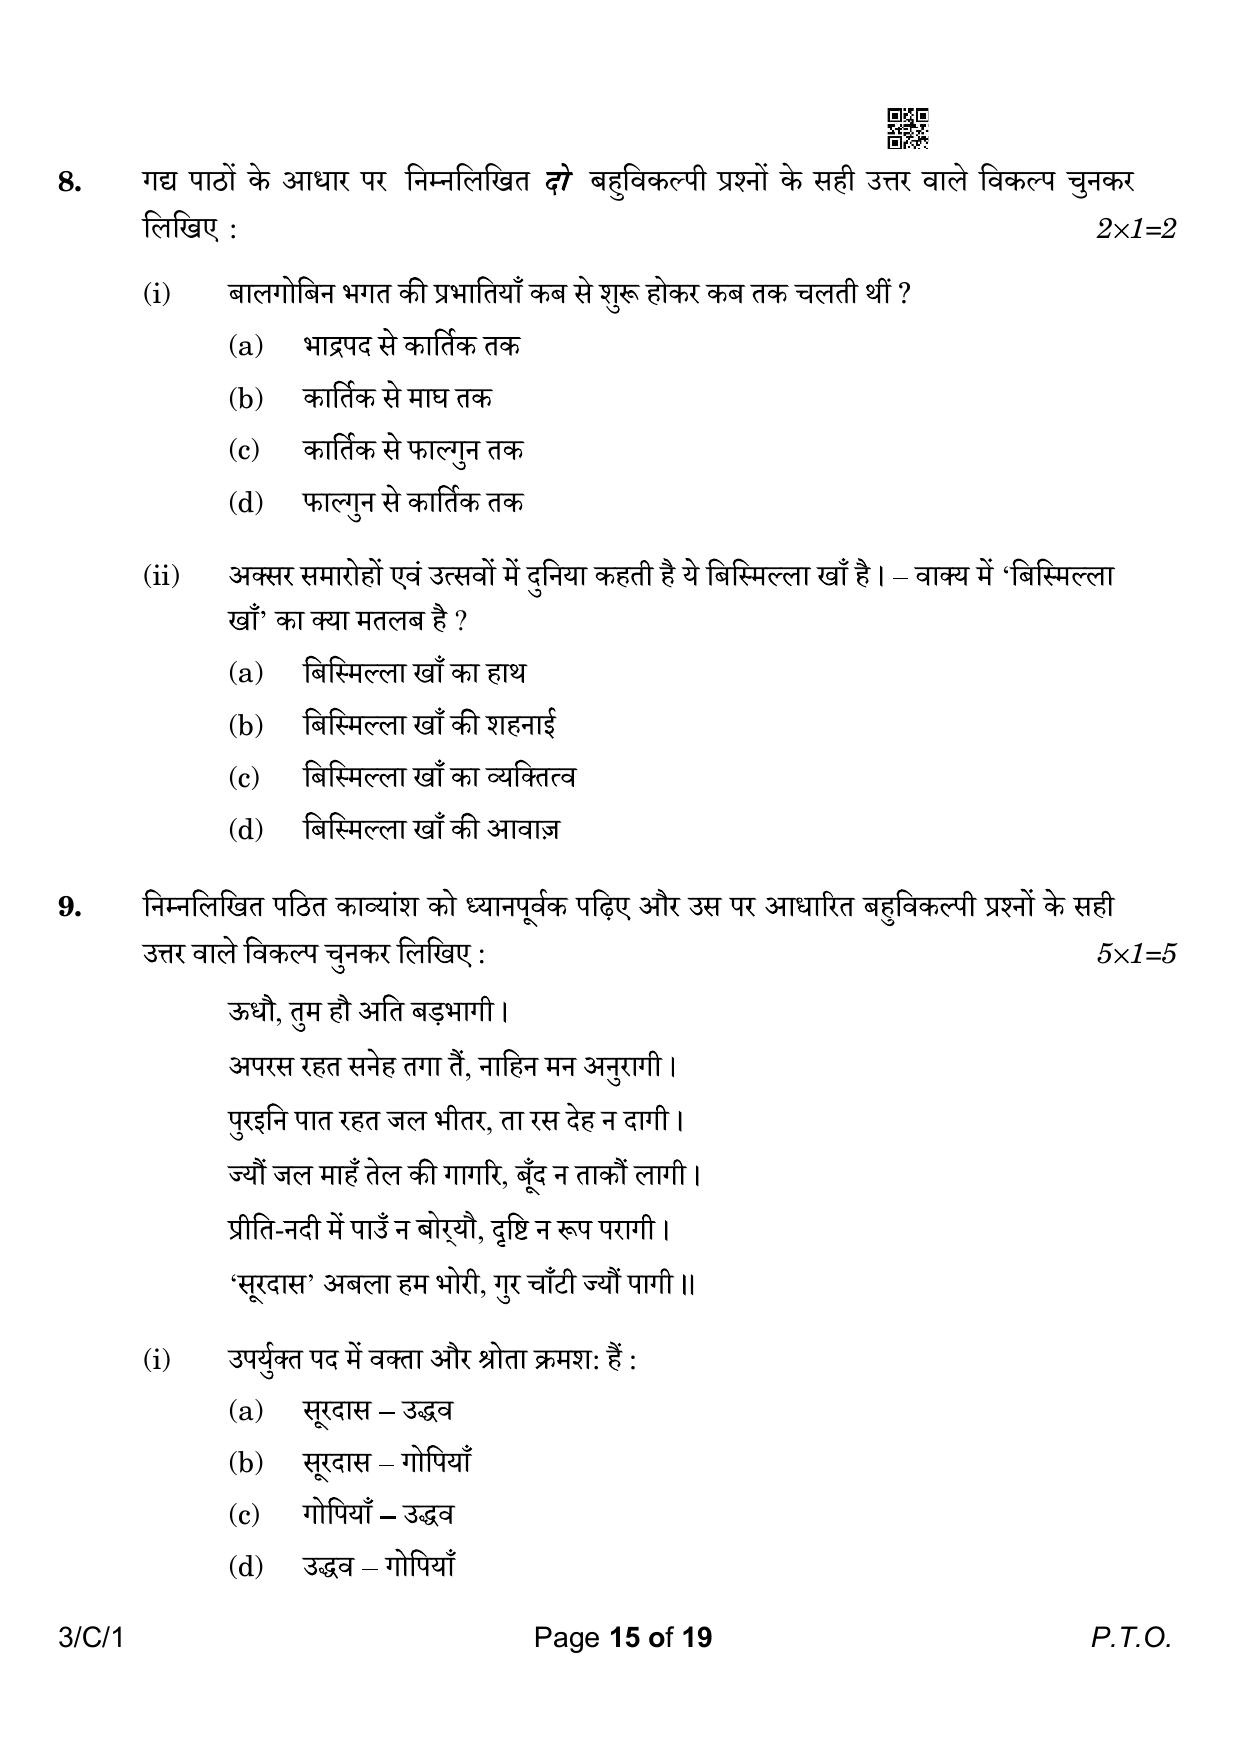 CBSE Class 10 3-1 Hindi A 2023 (Compartment) Question Paper - Page 15